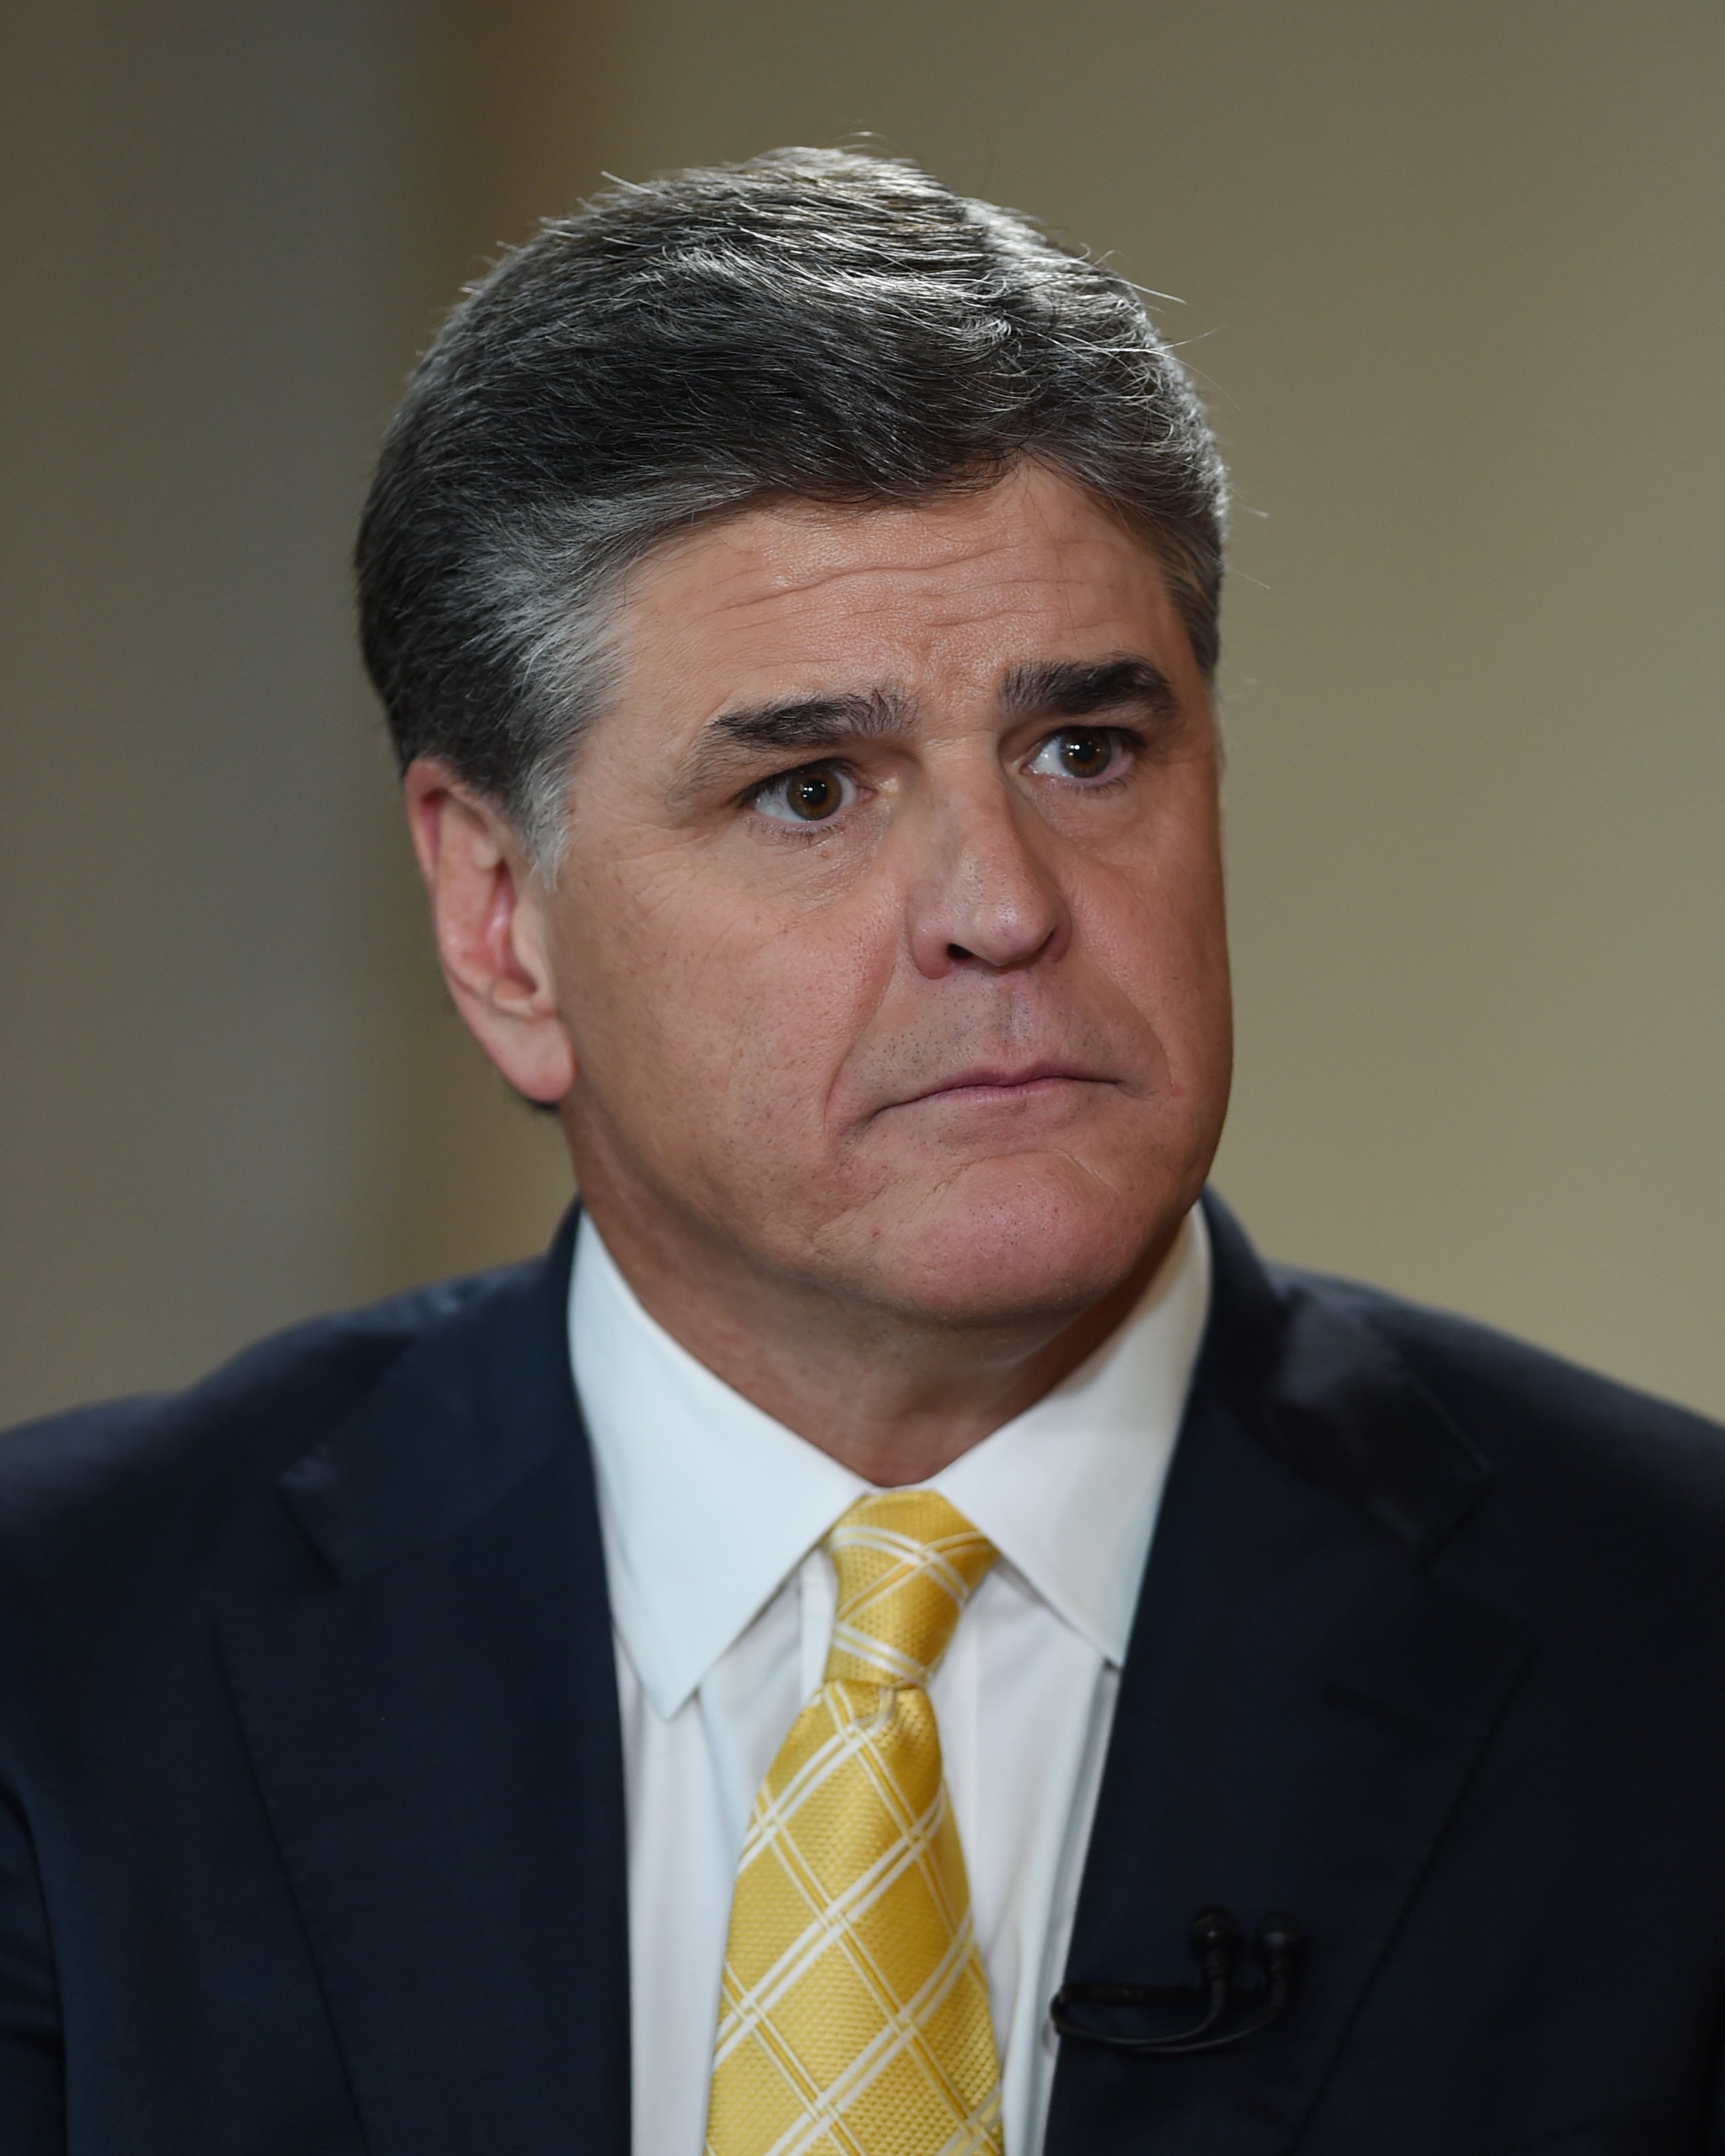 Sean Hannity at the Marco Rubio announcement for the Republican presidential nomination on April 13, 2015 | Source: Getty Images